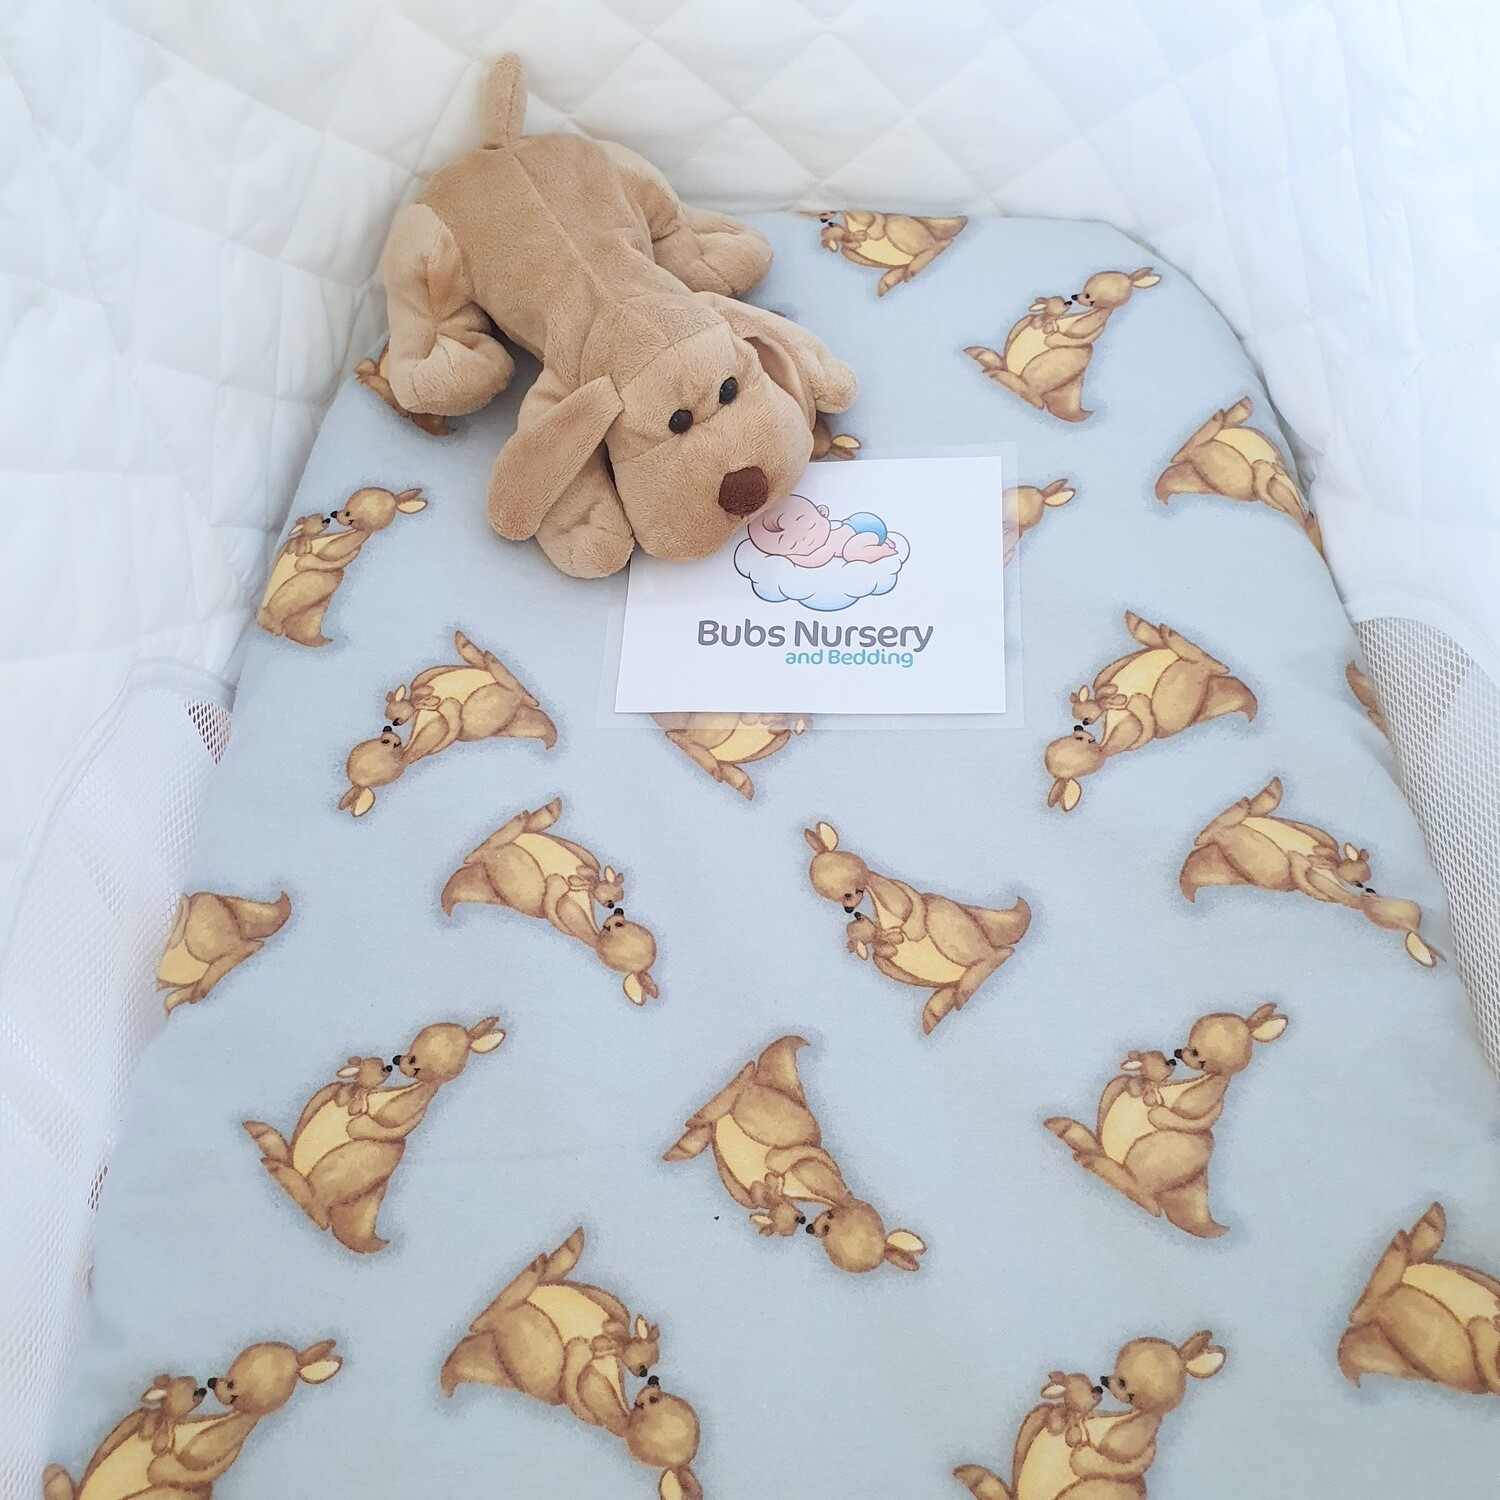 Gender neutral "Kangaroo & Joey" print flannel fitted sheet for CO-SLEEPER or CRADLE - To fit 55 x 95 cm